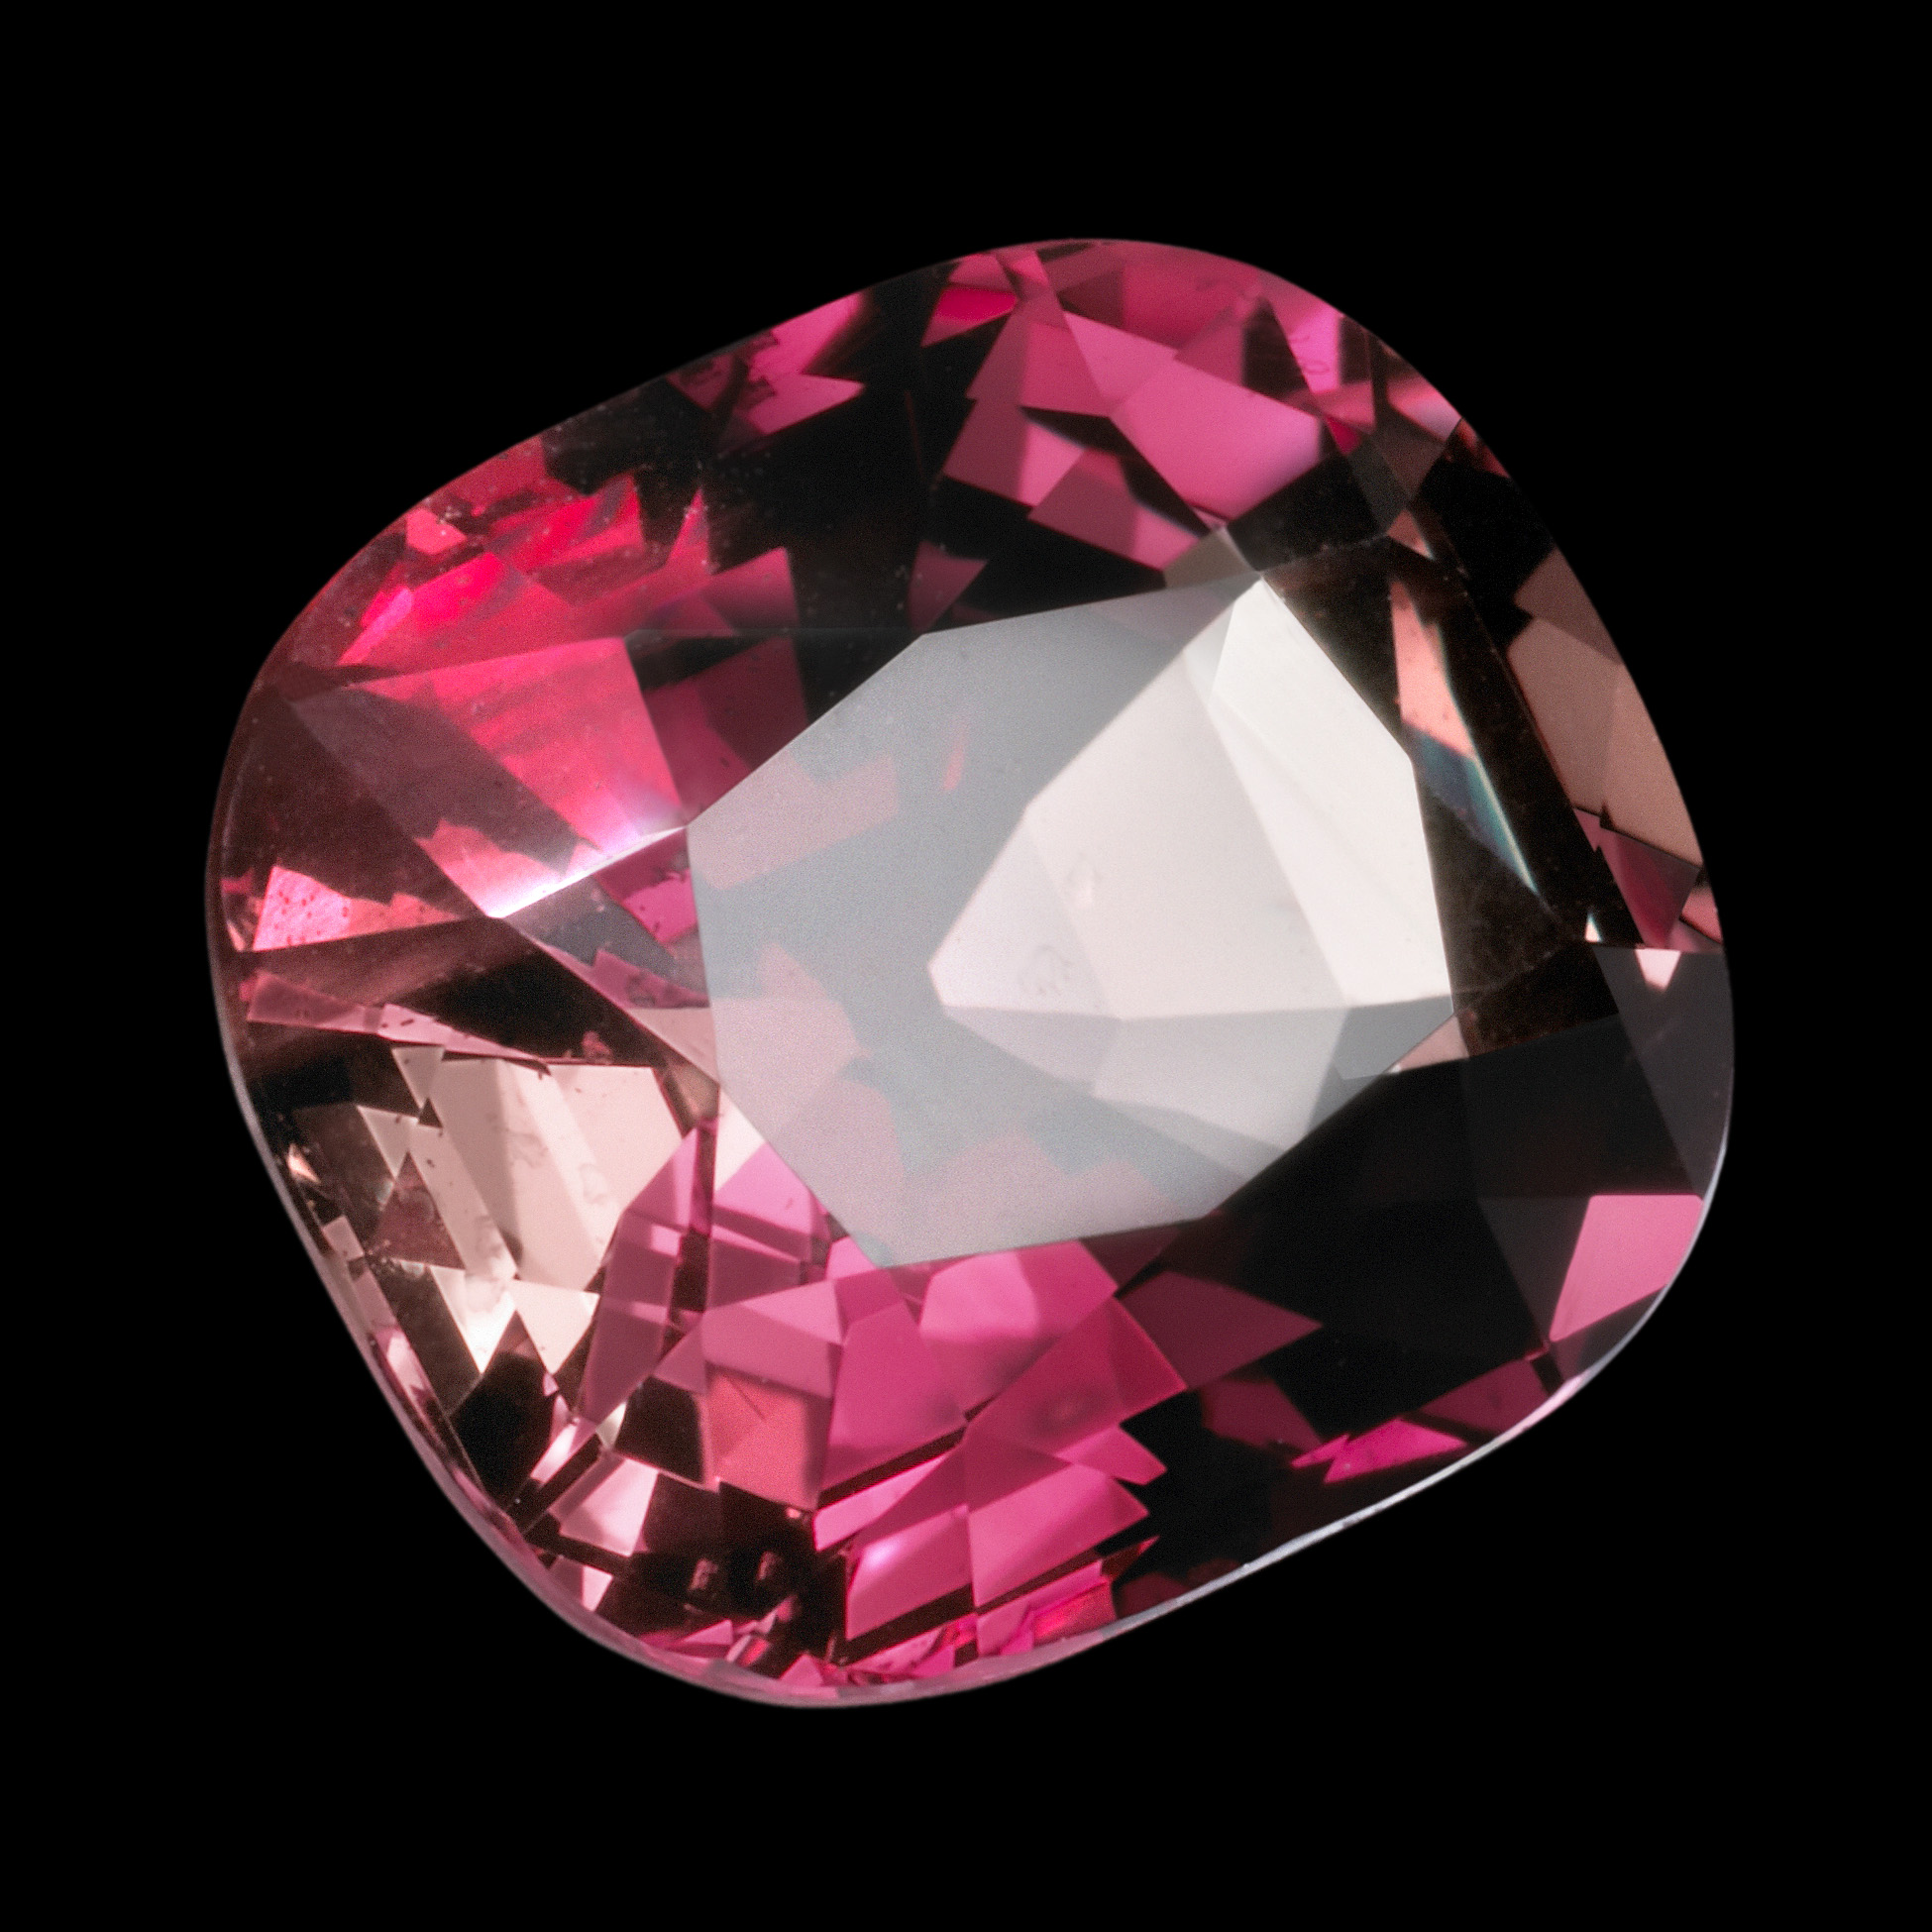 Faceted gem weighing 11.65 carats, a rare color changing variety of chrysoberyl called alexandrite. It is shown here in it's red color, as seen under incandescent light. The stone is 14 mm in height.